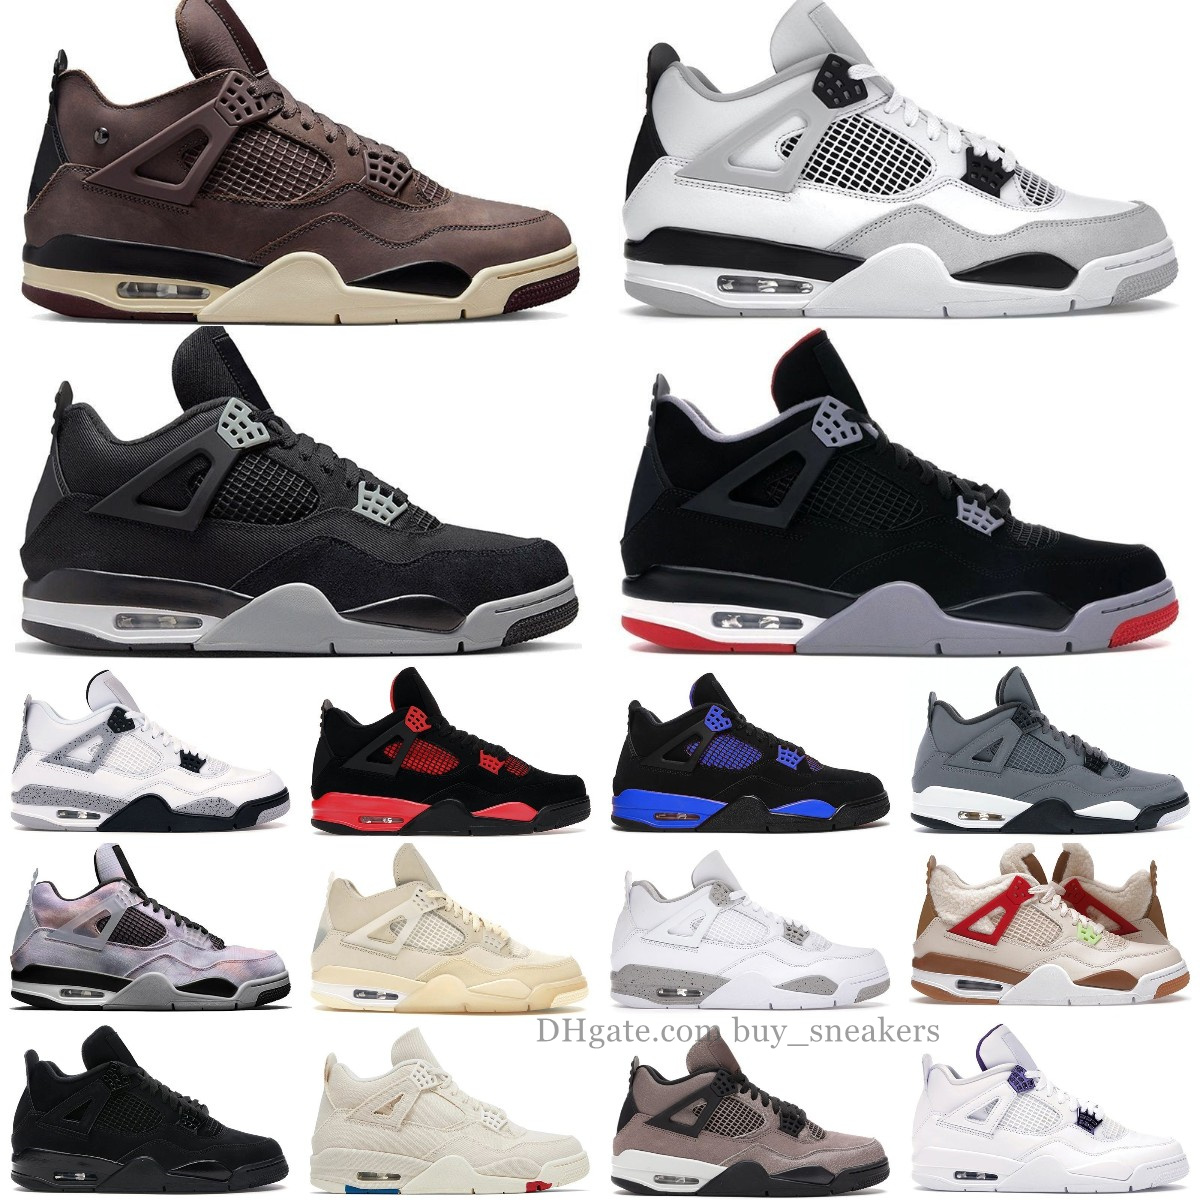 Qualité 4 Chaussures de basket-ball rétro hommes Femmes 4s Military Black Canvas Cat Violet Ore Canyon Purple Red Thunder Master White Oreo Bred Sail Outdoor Sports Sneakers 5.5-13